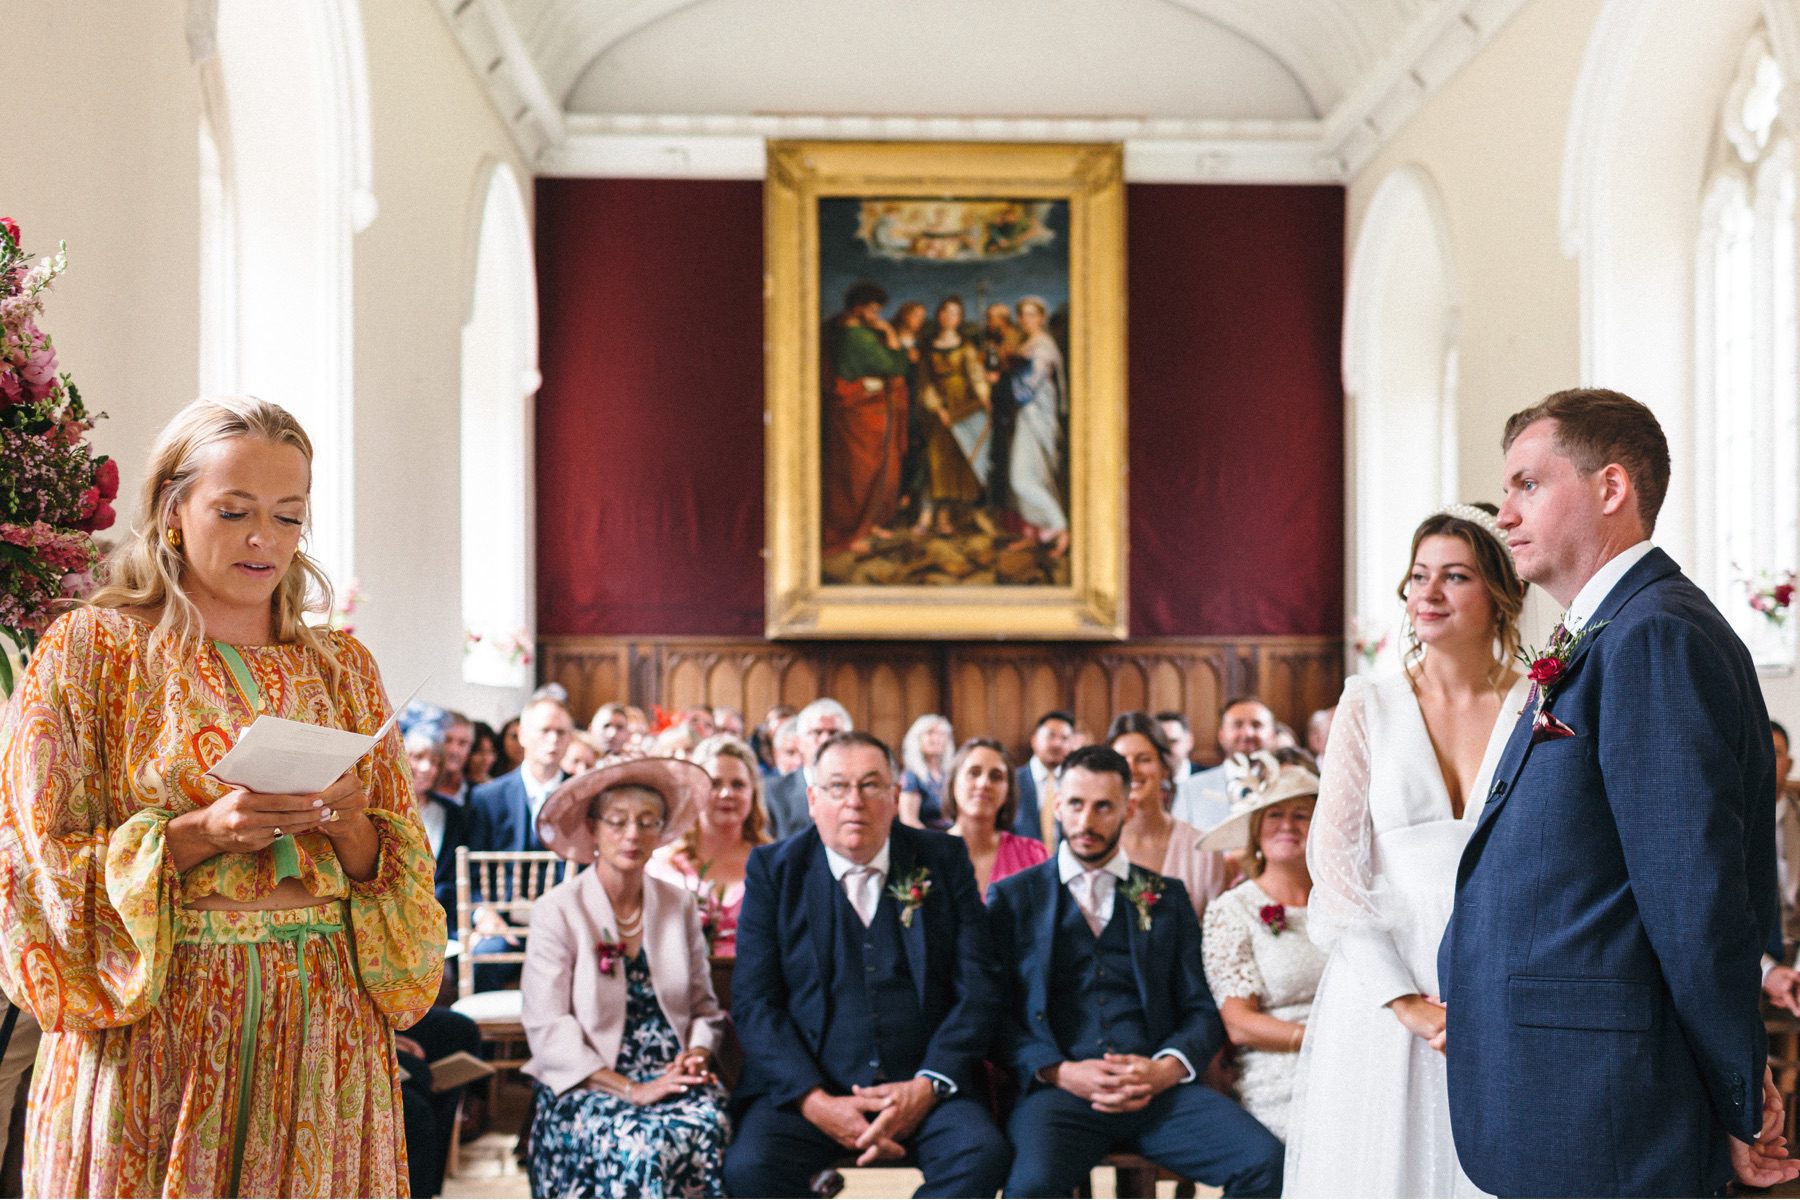 The ceremony discrete and relaxed photography captured by wedding photographer Devon & Cornwall_Freckle Photography